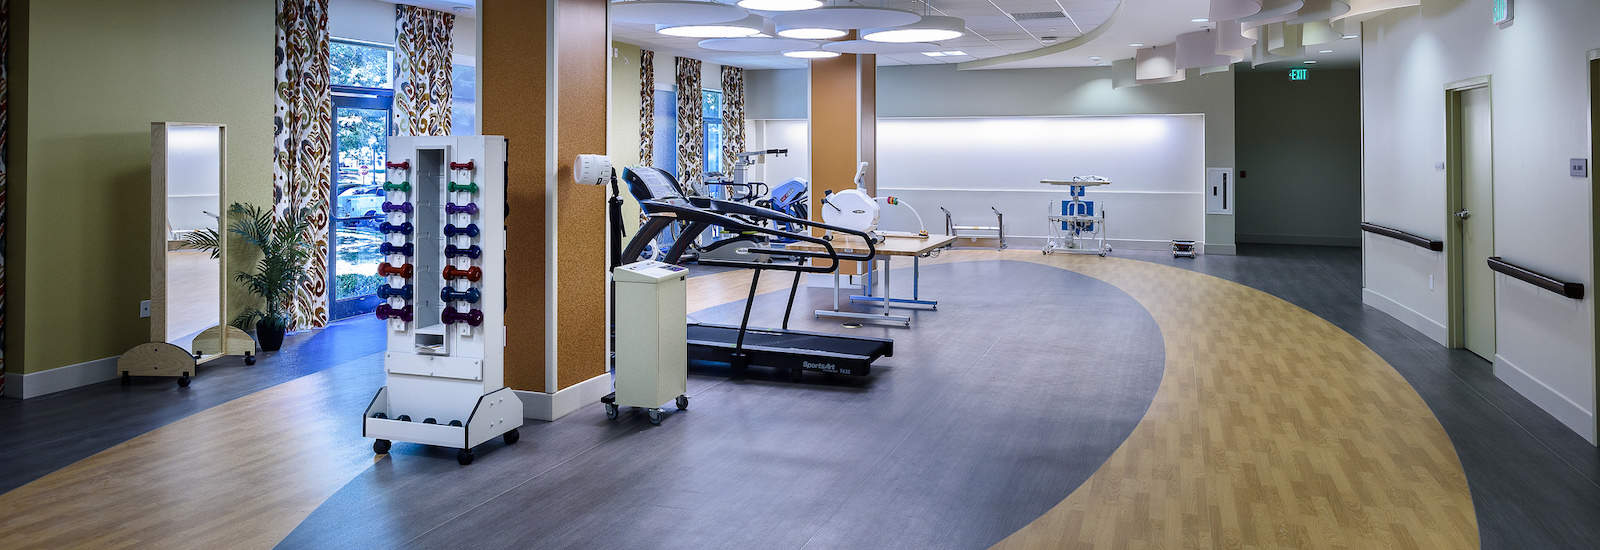 Physical therapy gym and equipment